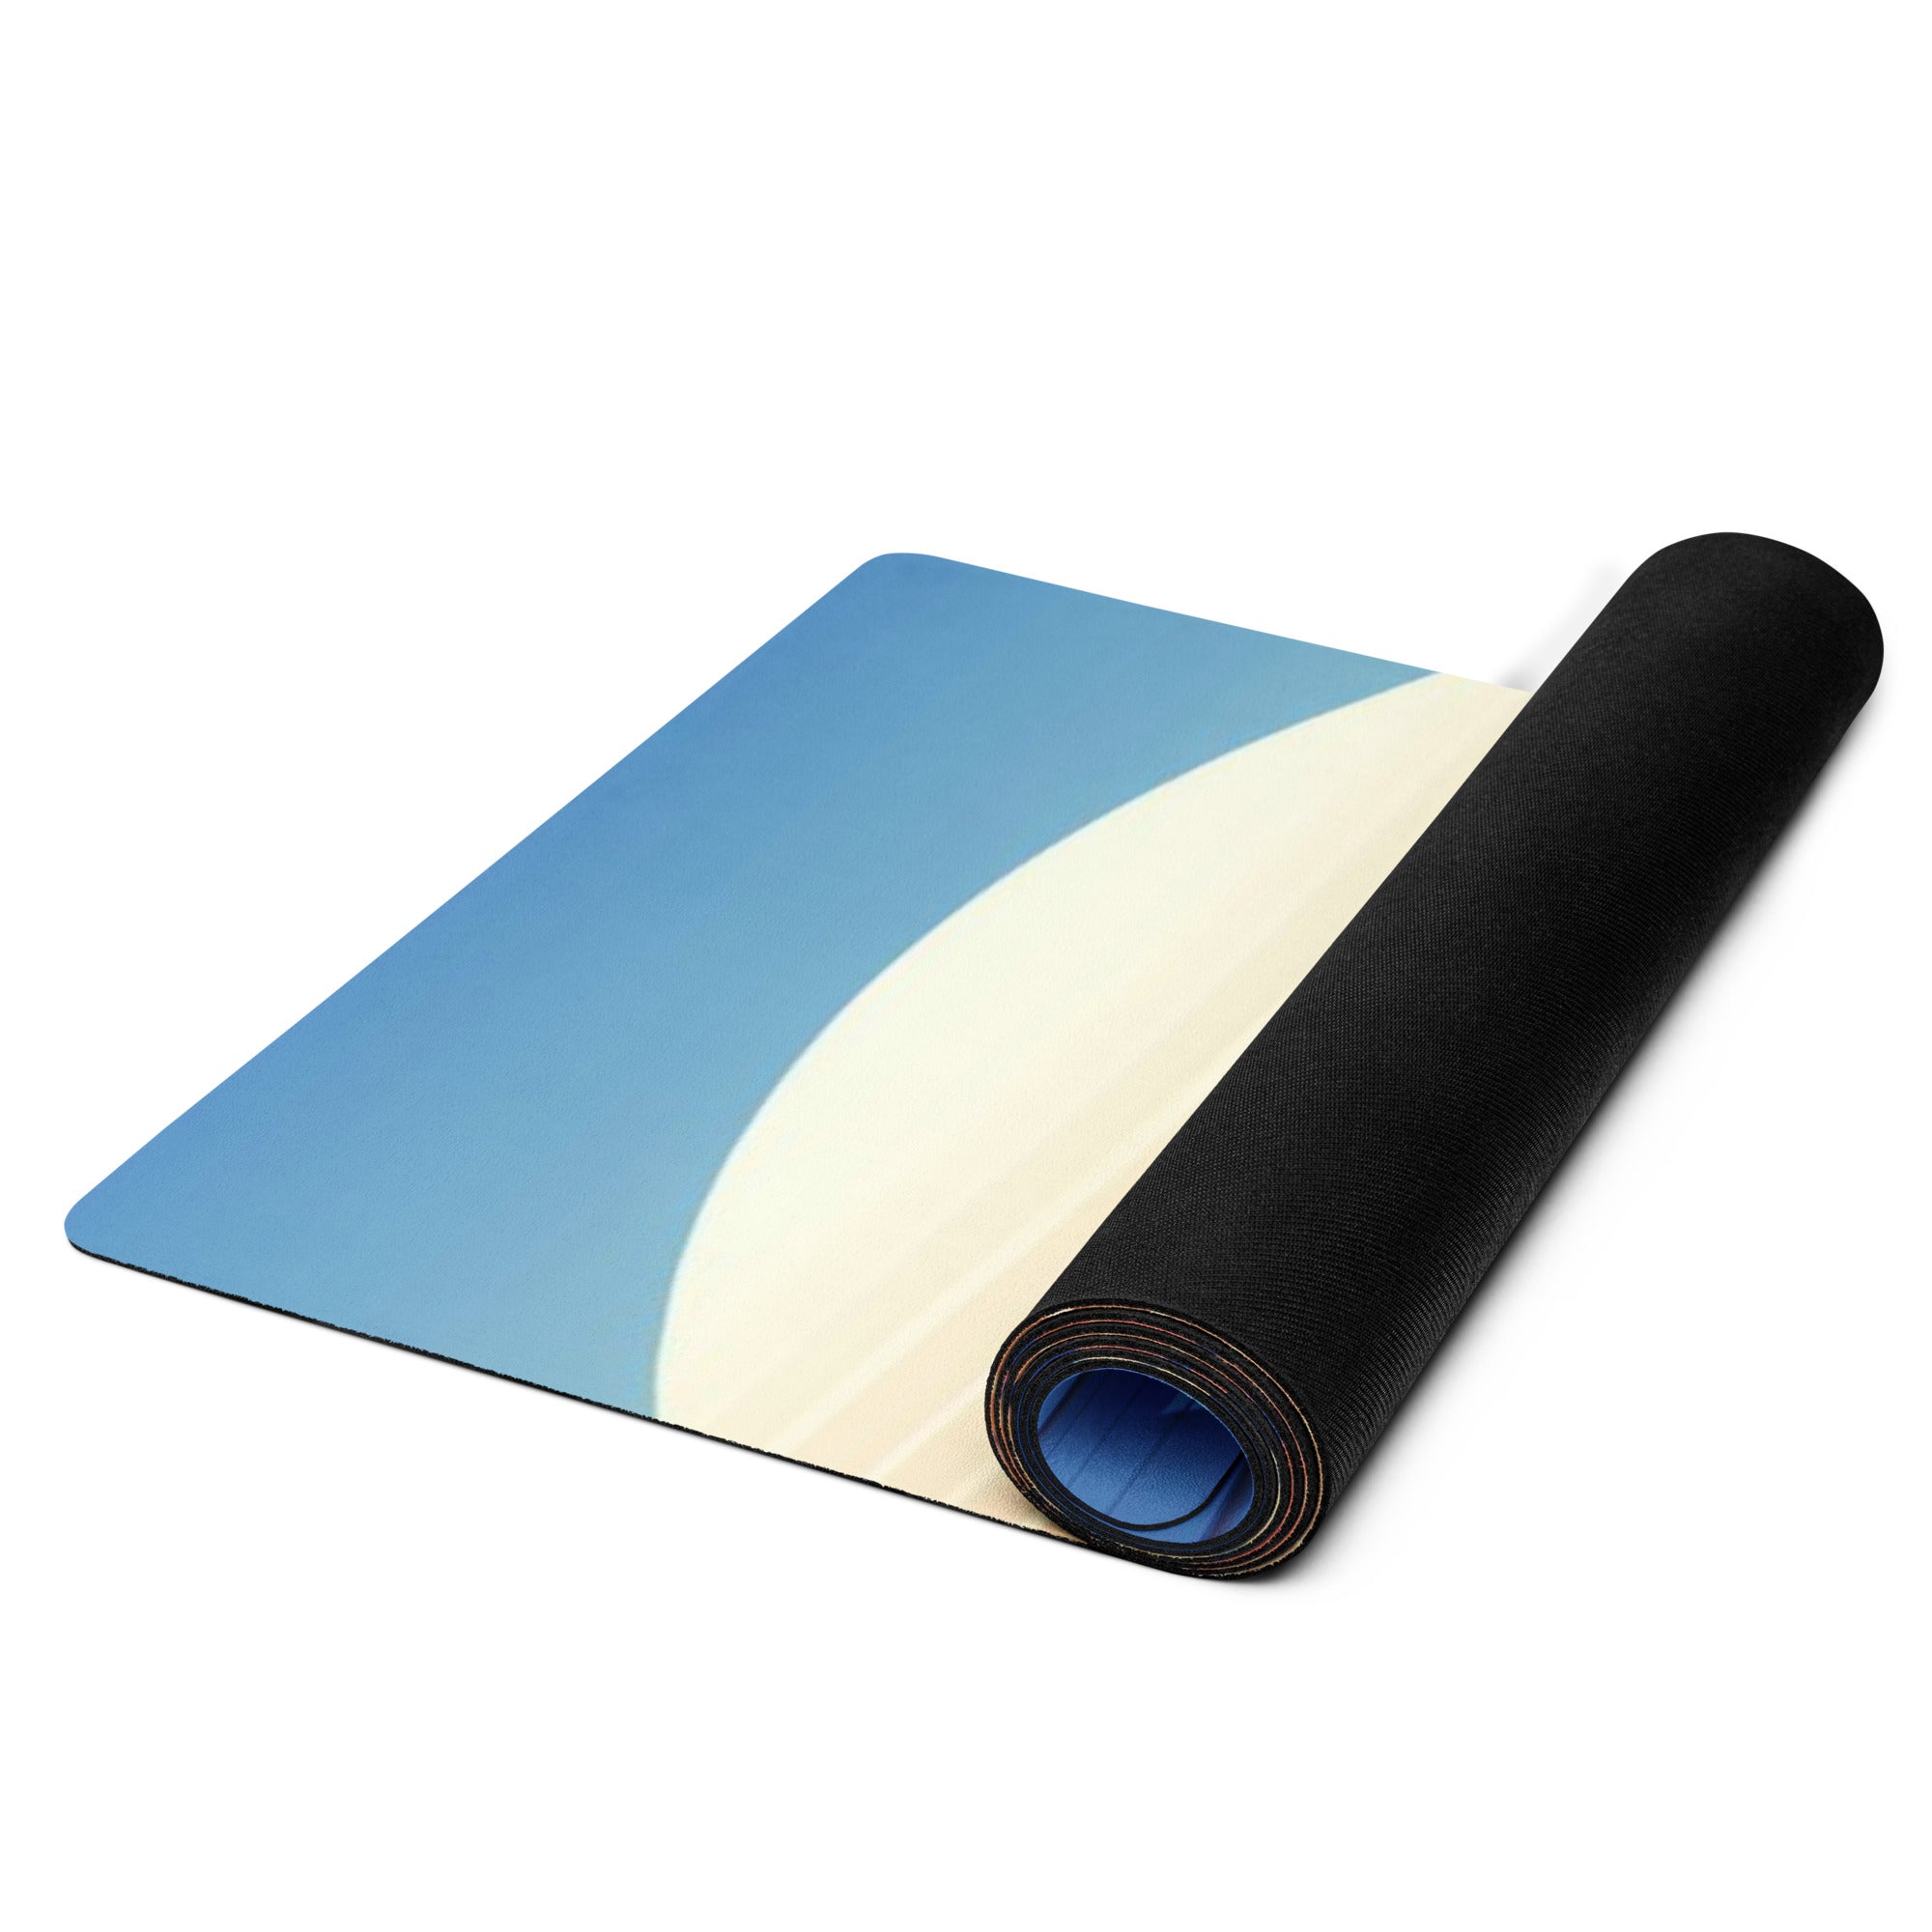 “Transform Your Yoga Sessions with Our High-Quality, Sweat-Resistant Yoga Mat.”